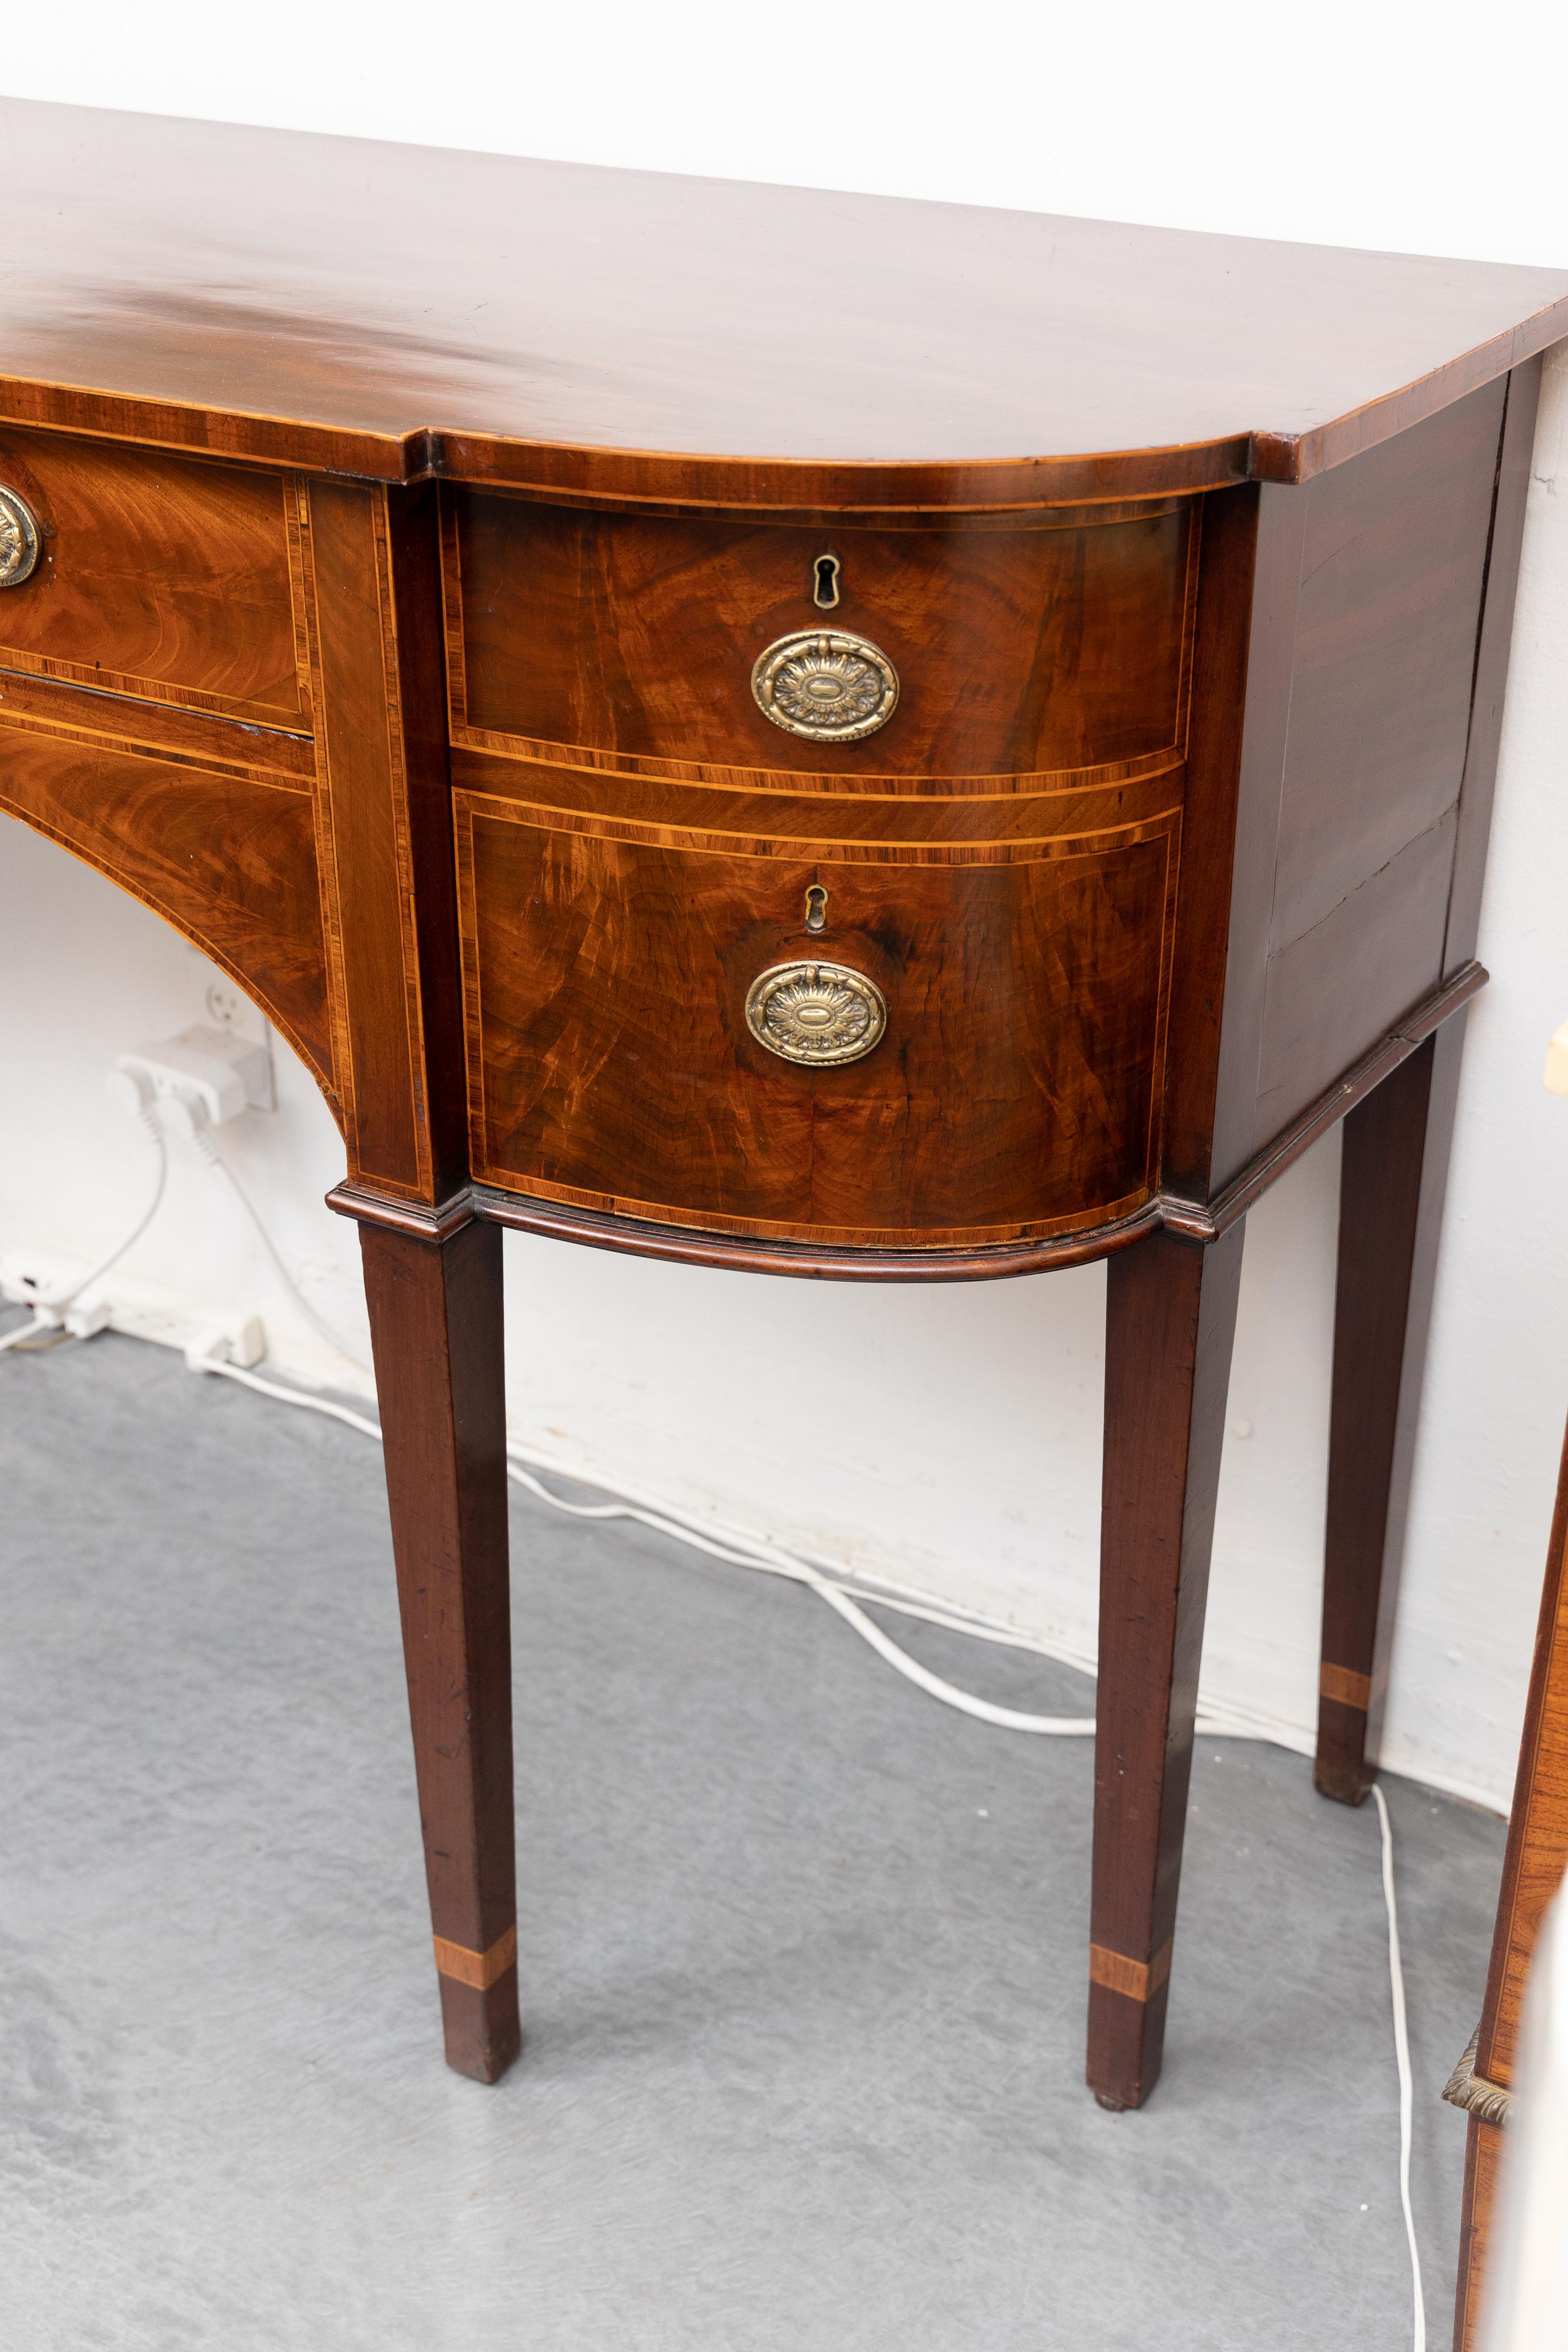 This is a graceful English George III style inlaid mahogany sideboard. The top has a straight edge over one large central drawer flanked by two curved double banks of drawers, all having figured mahogany and inlaid overall with rosewood crossbanding